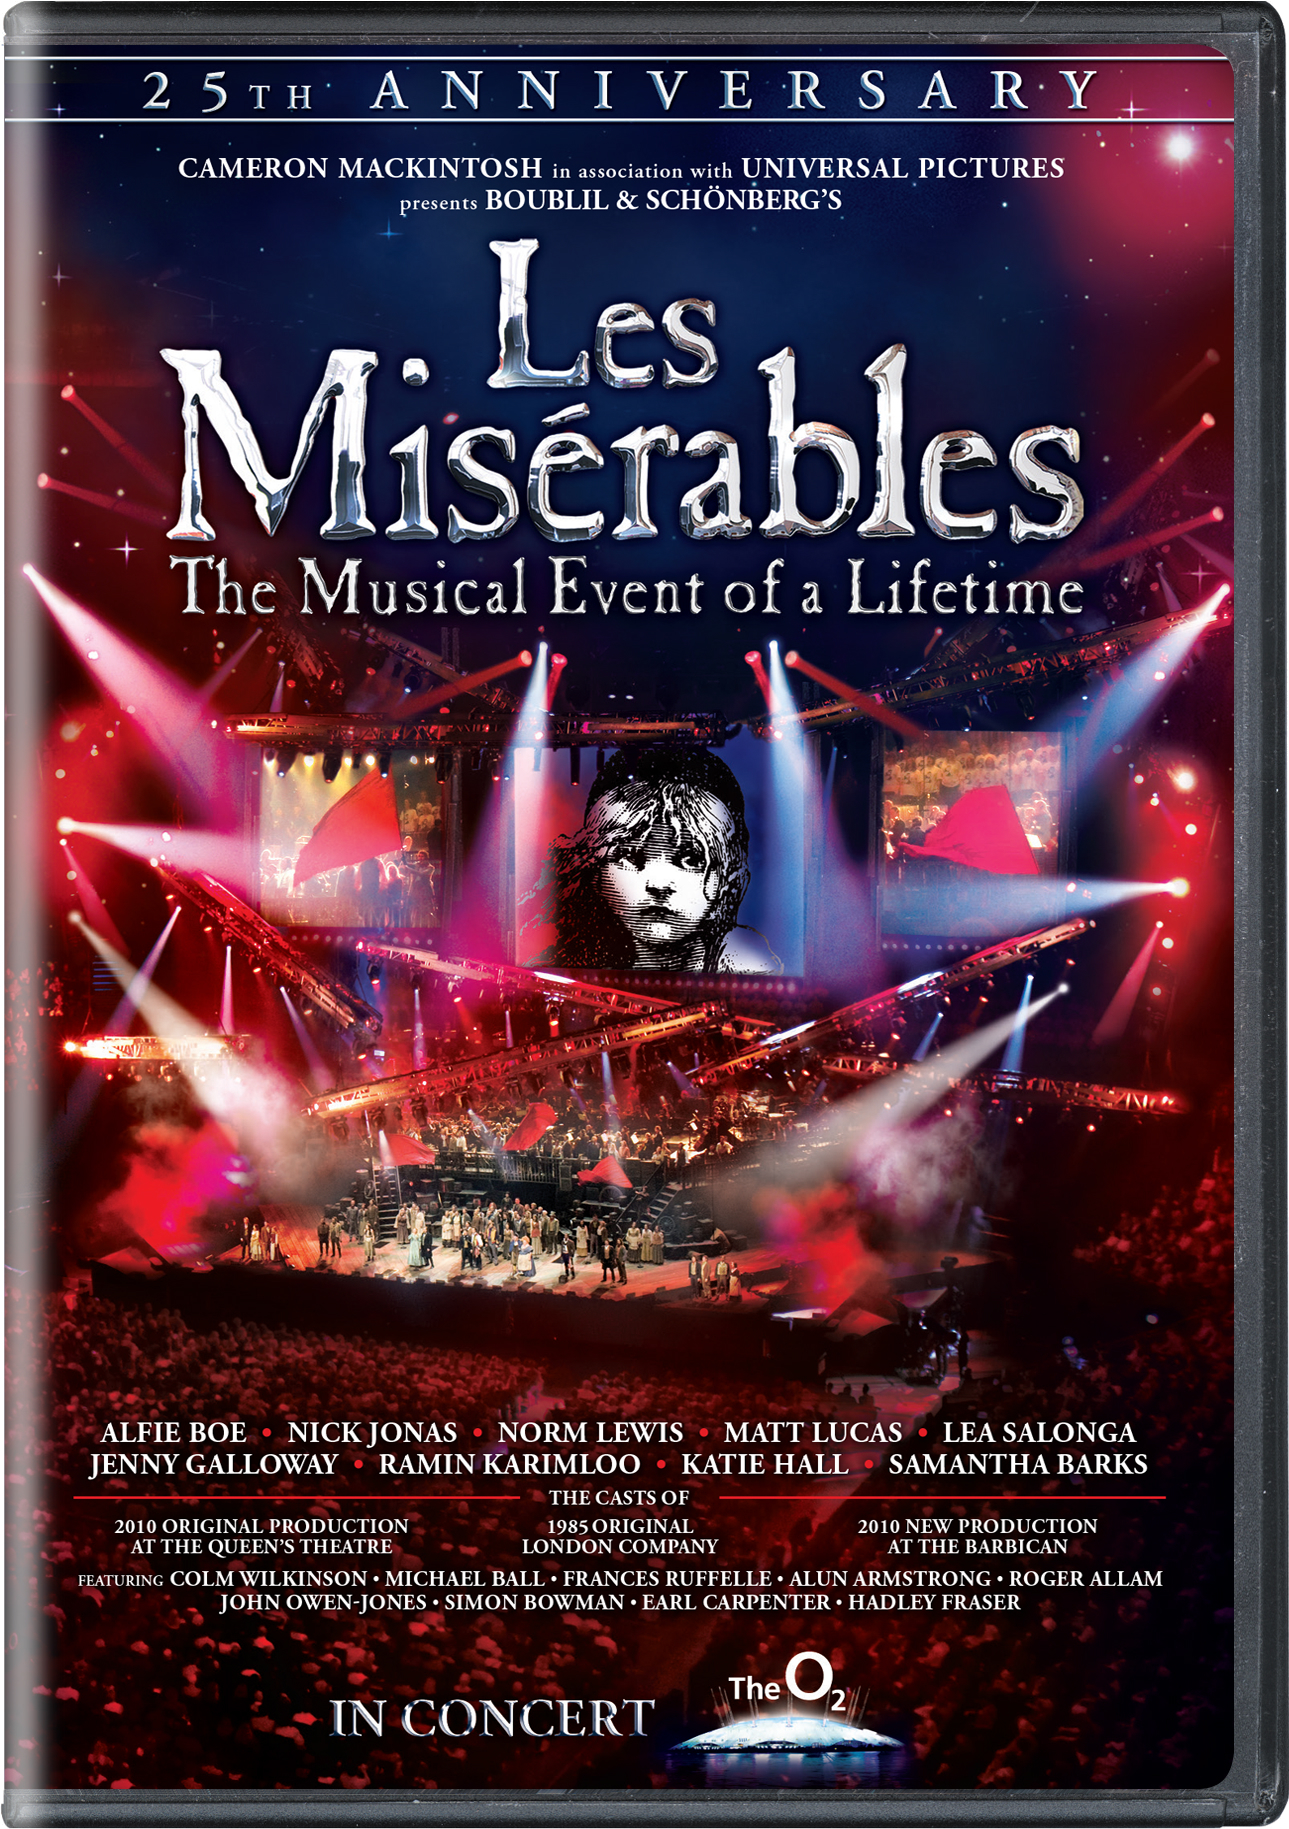 Les Misérables: In Concert - 25th Anniversary Show (25th Anniversary Edition) - DVD [ 2010 ]  - Stage Musicals Music On DVD